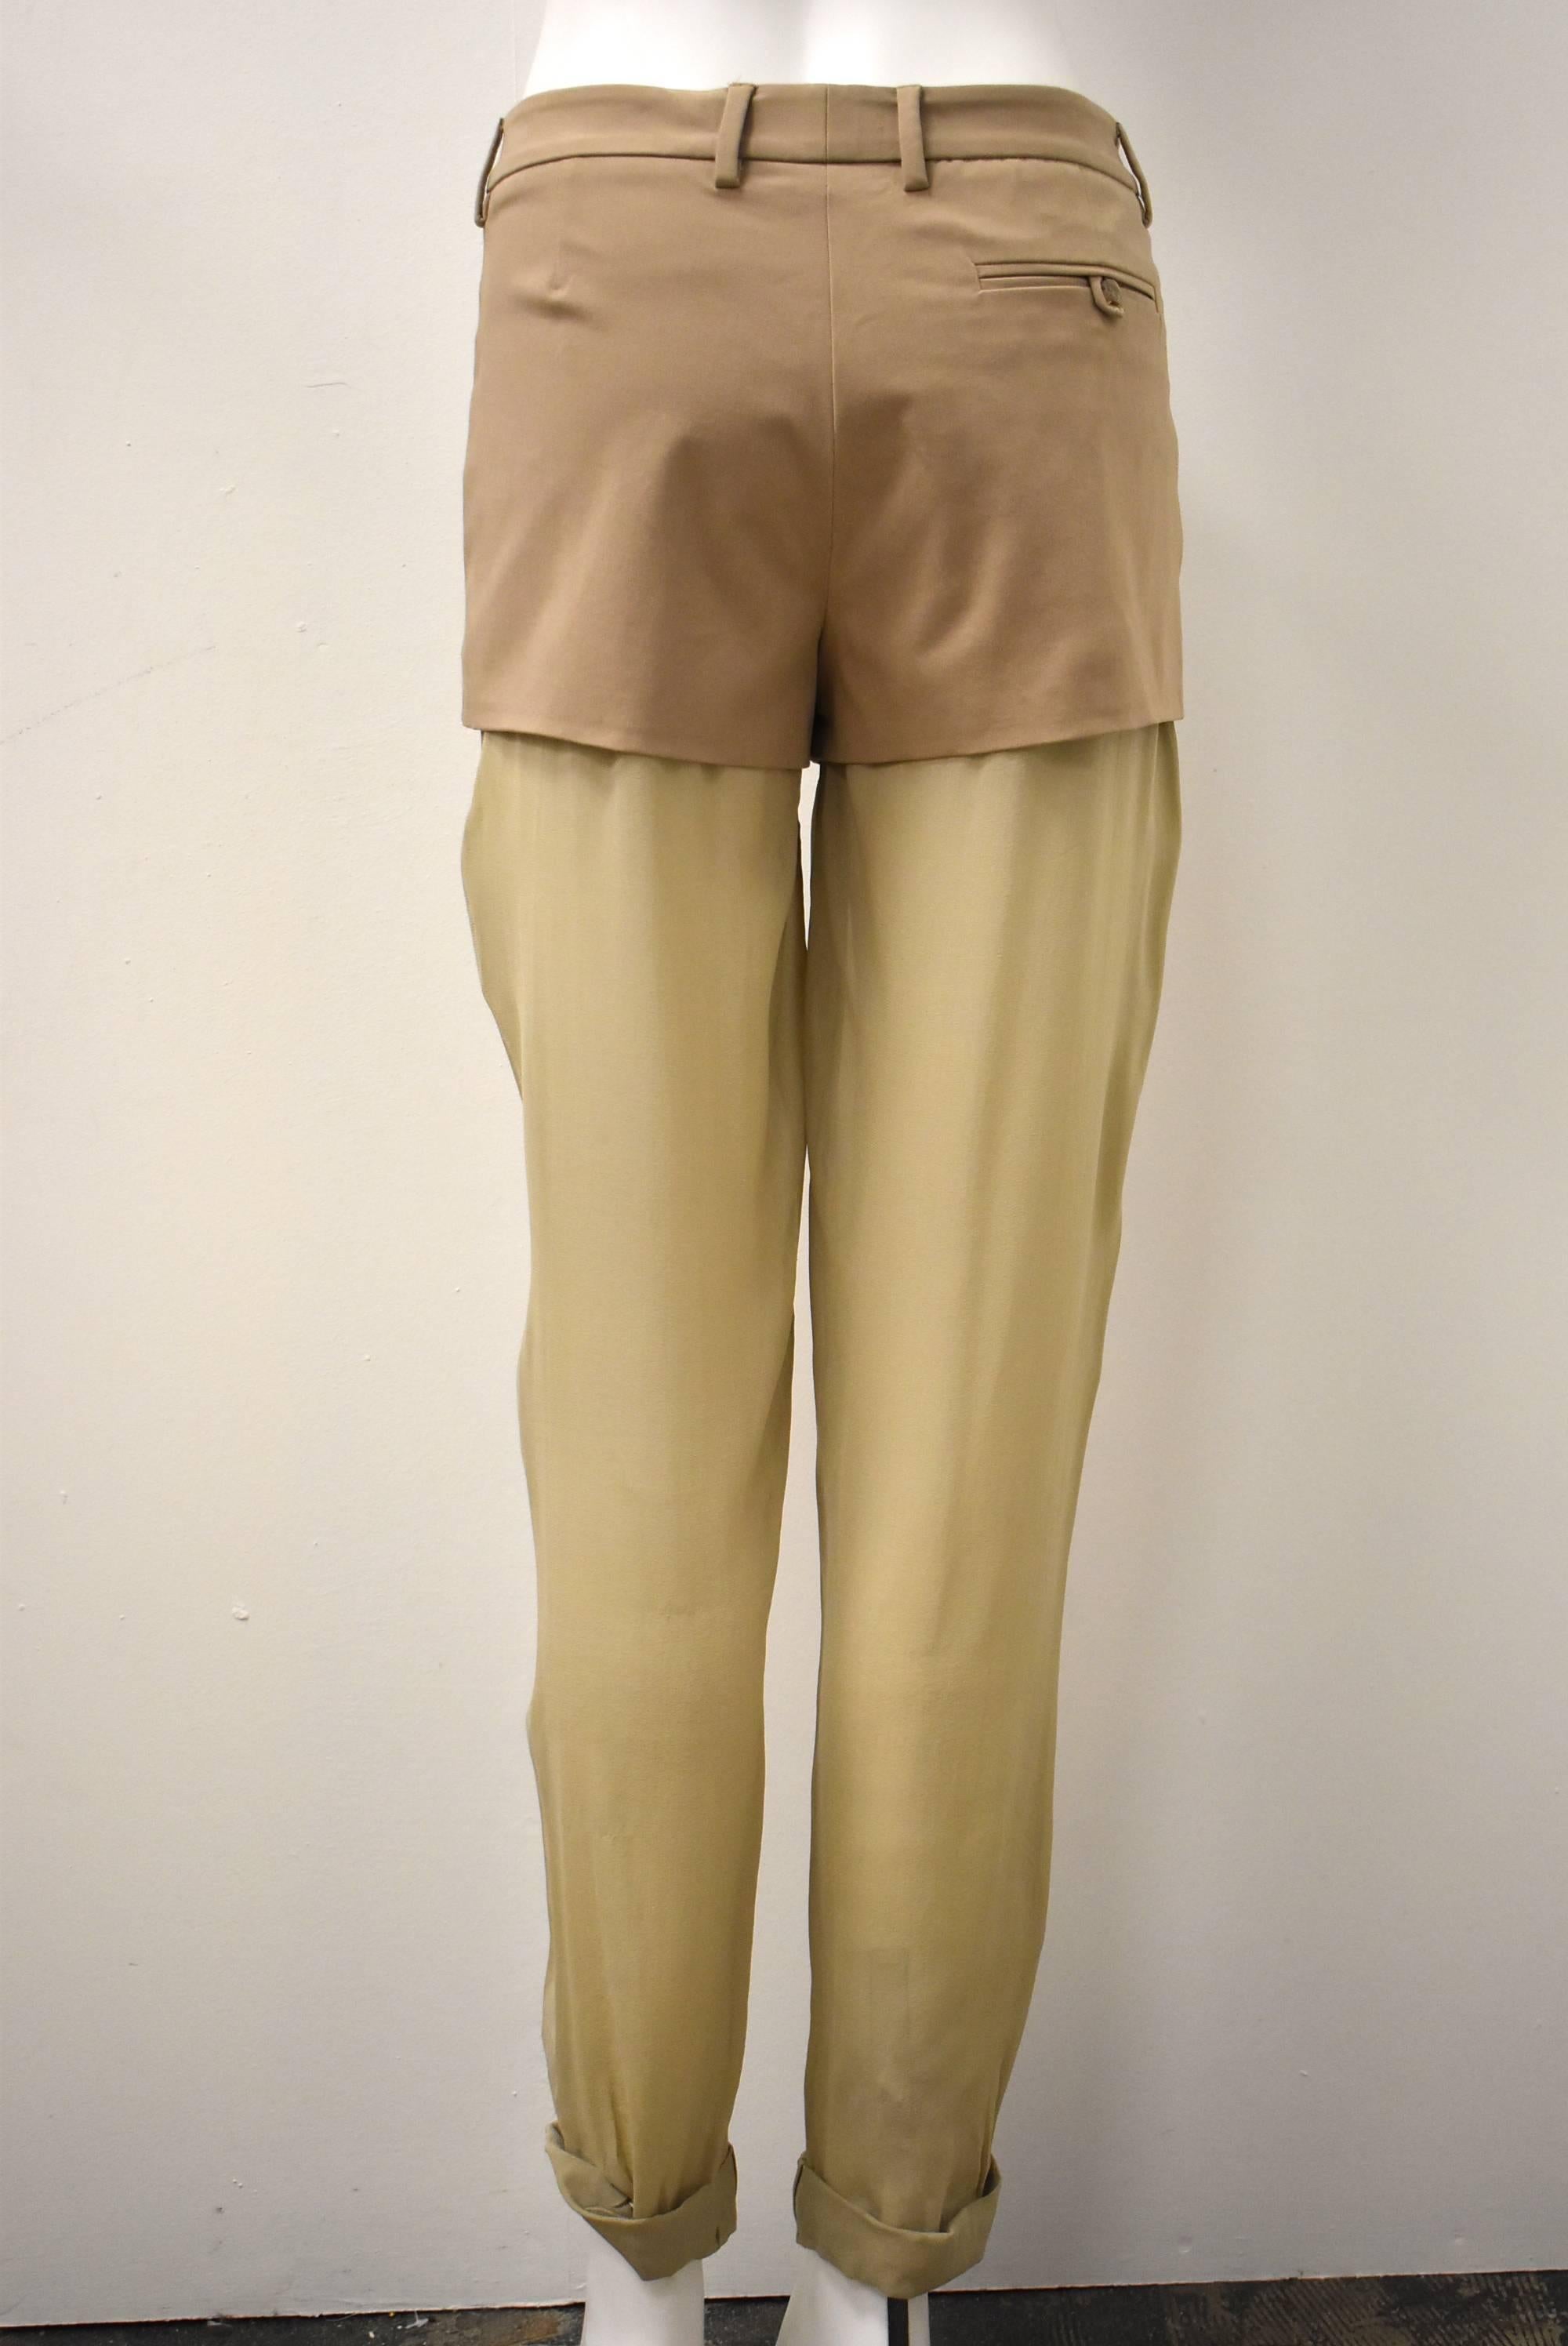 Maison Martin Margiela Trousers/Shorts with Sheer Details In Good Condition In London, GB